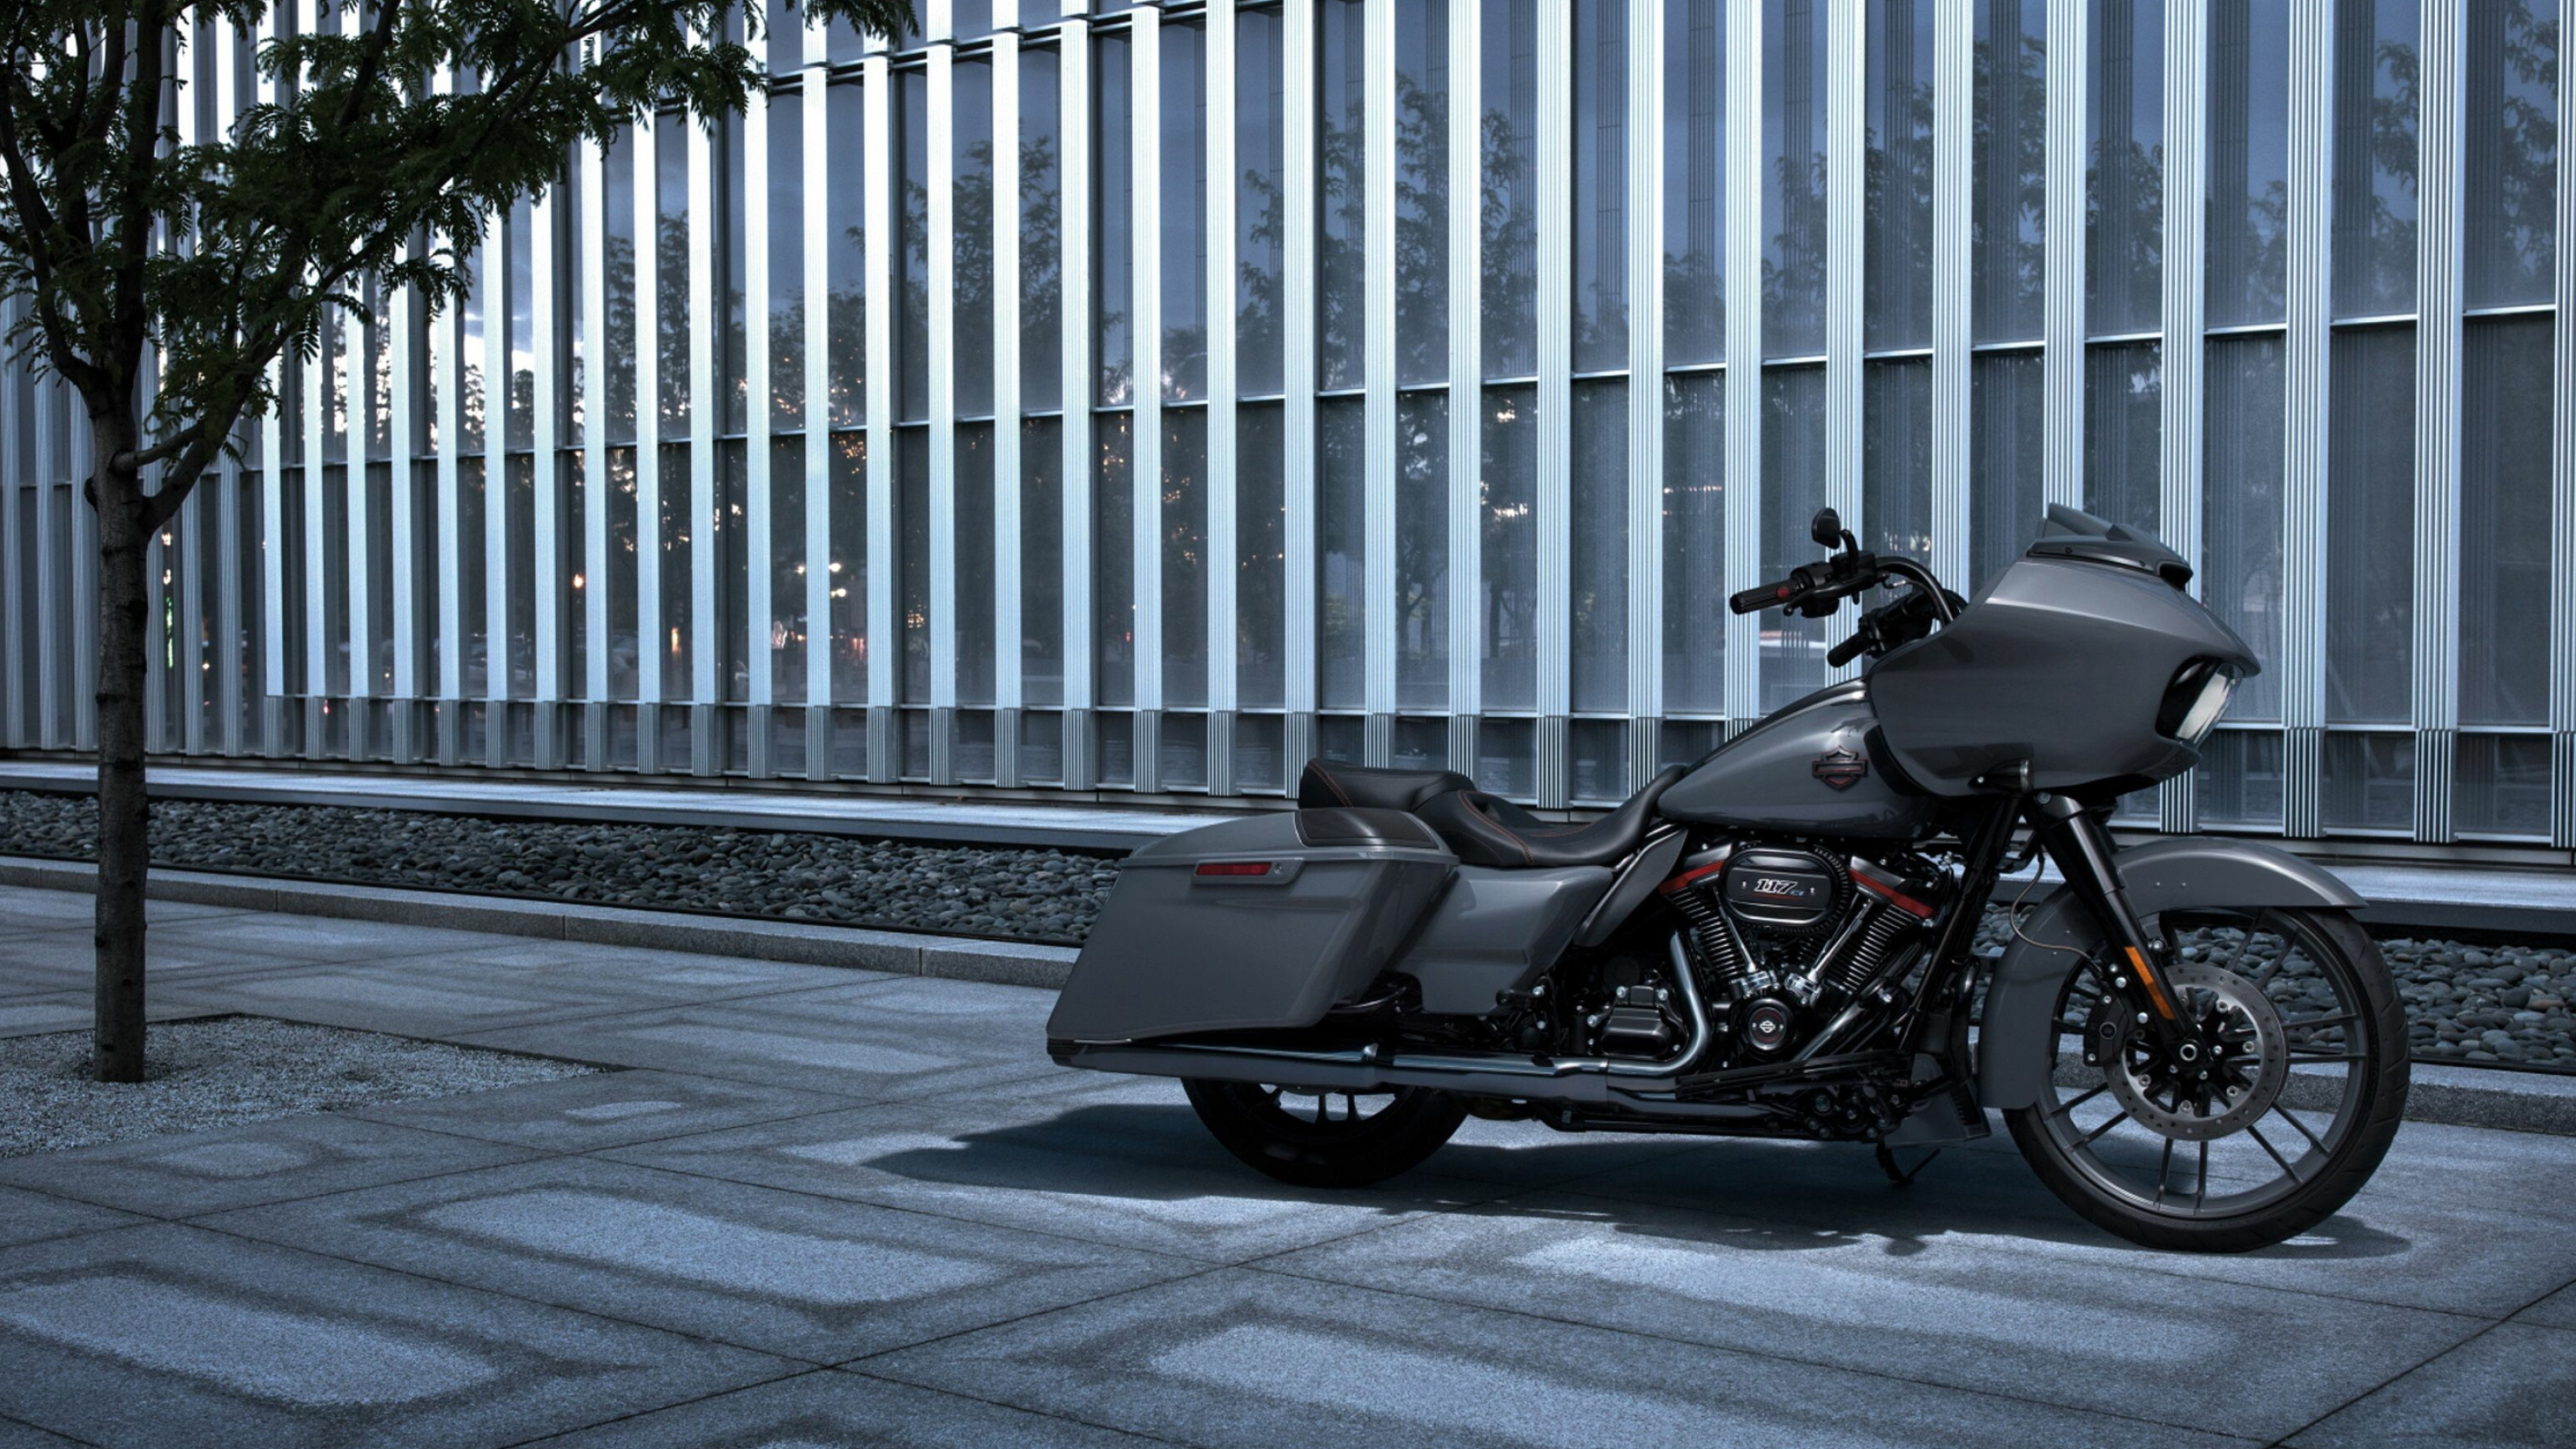 Harley-Davidson Glide: Road Glide, Introduced an updated frame mounted Tour Glide fairing. 3840x2160 4K Background.